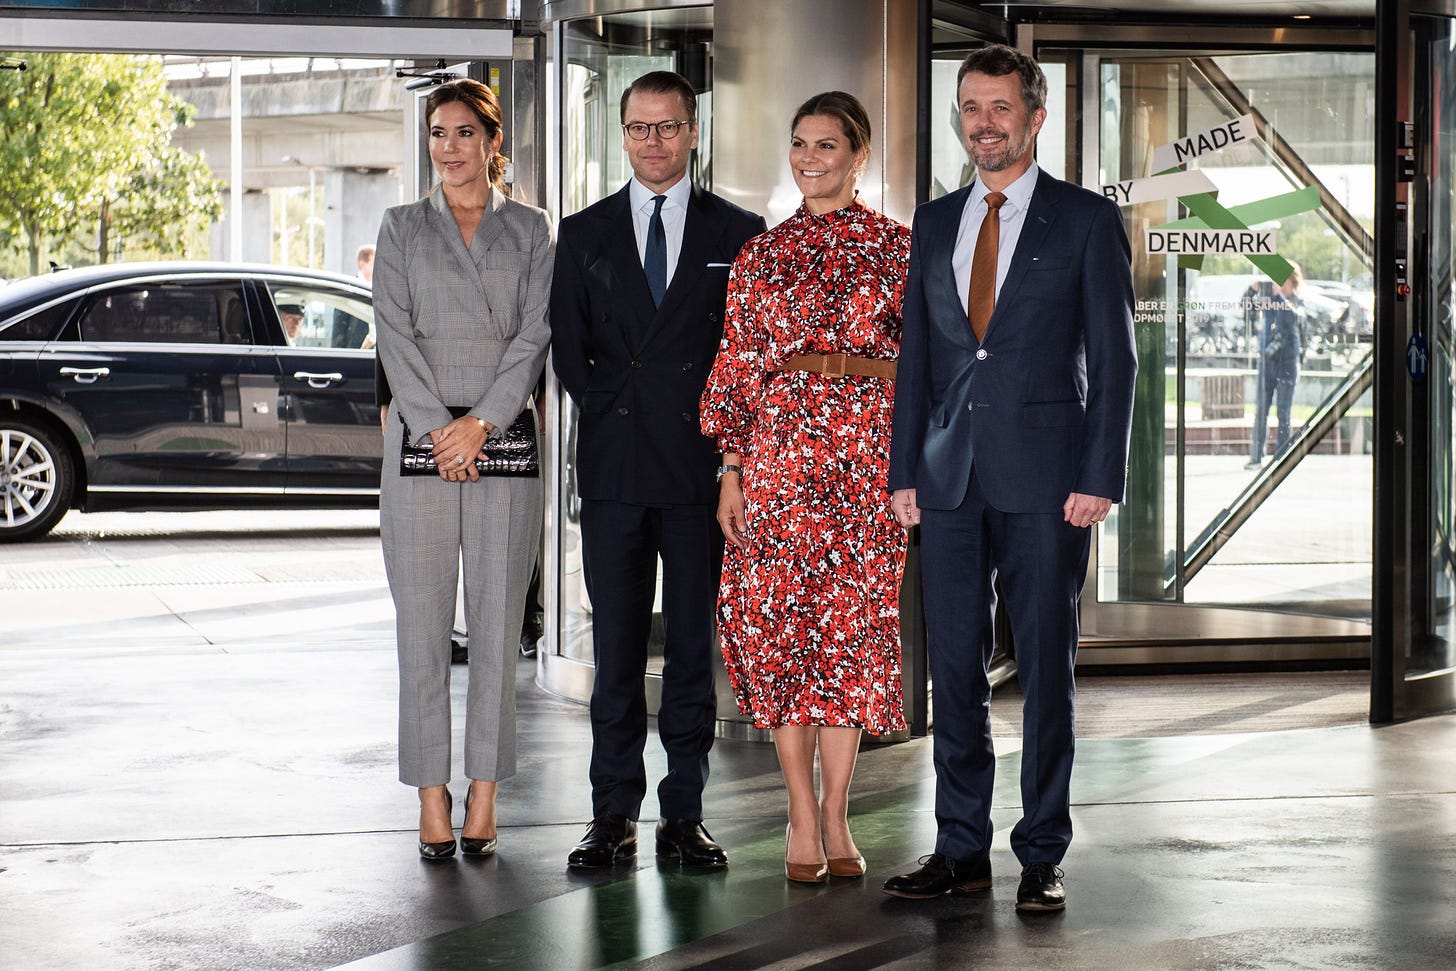 Queen Mary, Prince Daniel, Crown Princess Victoria and King Frederik